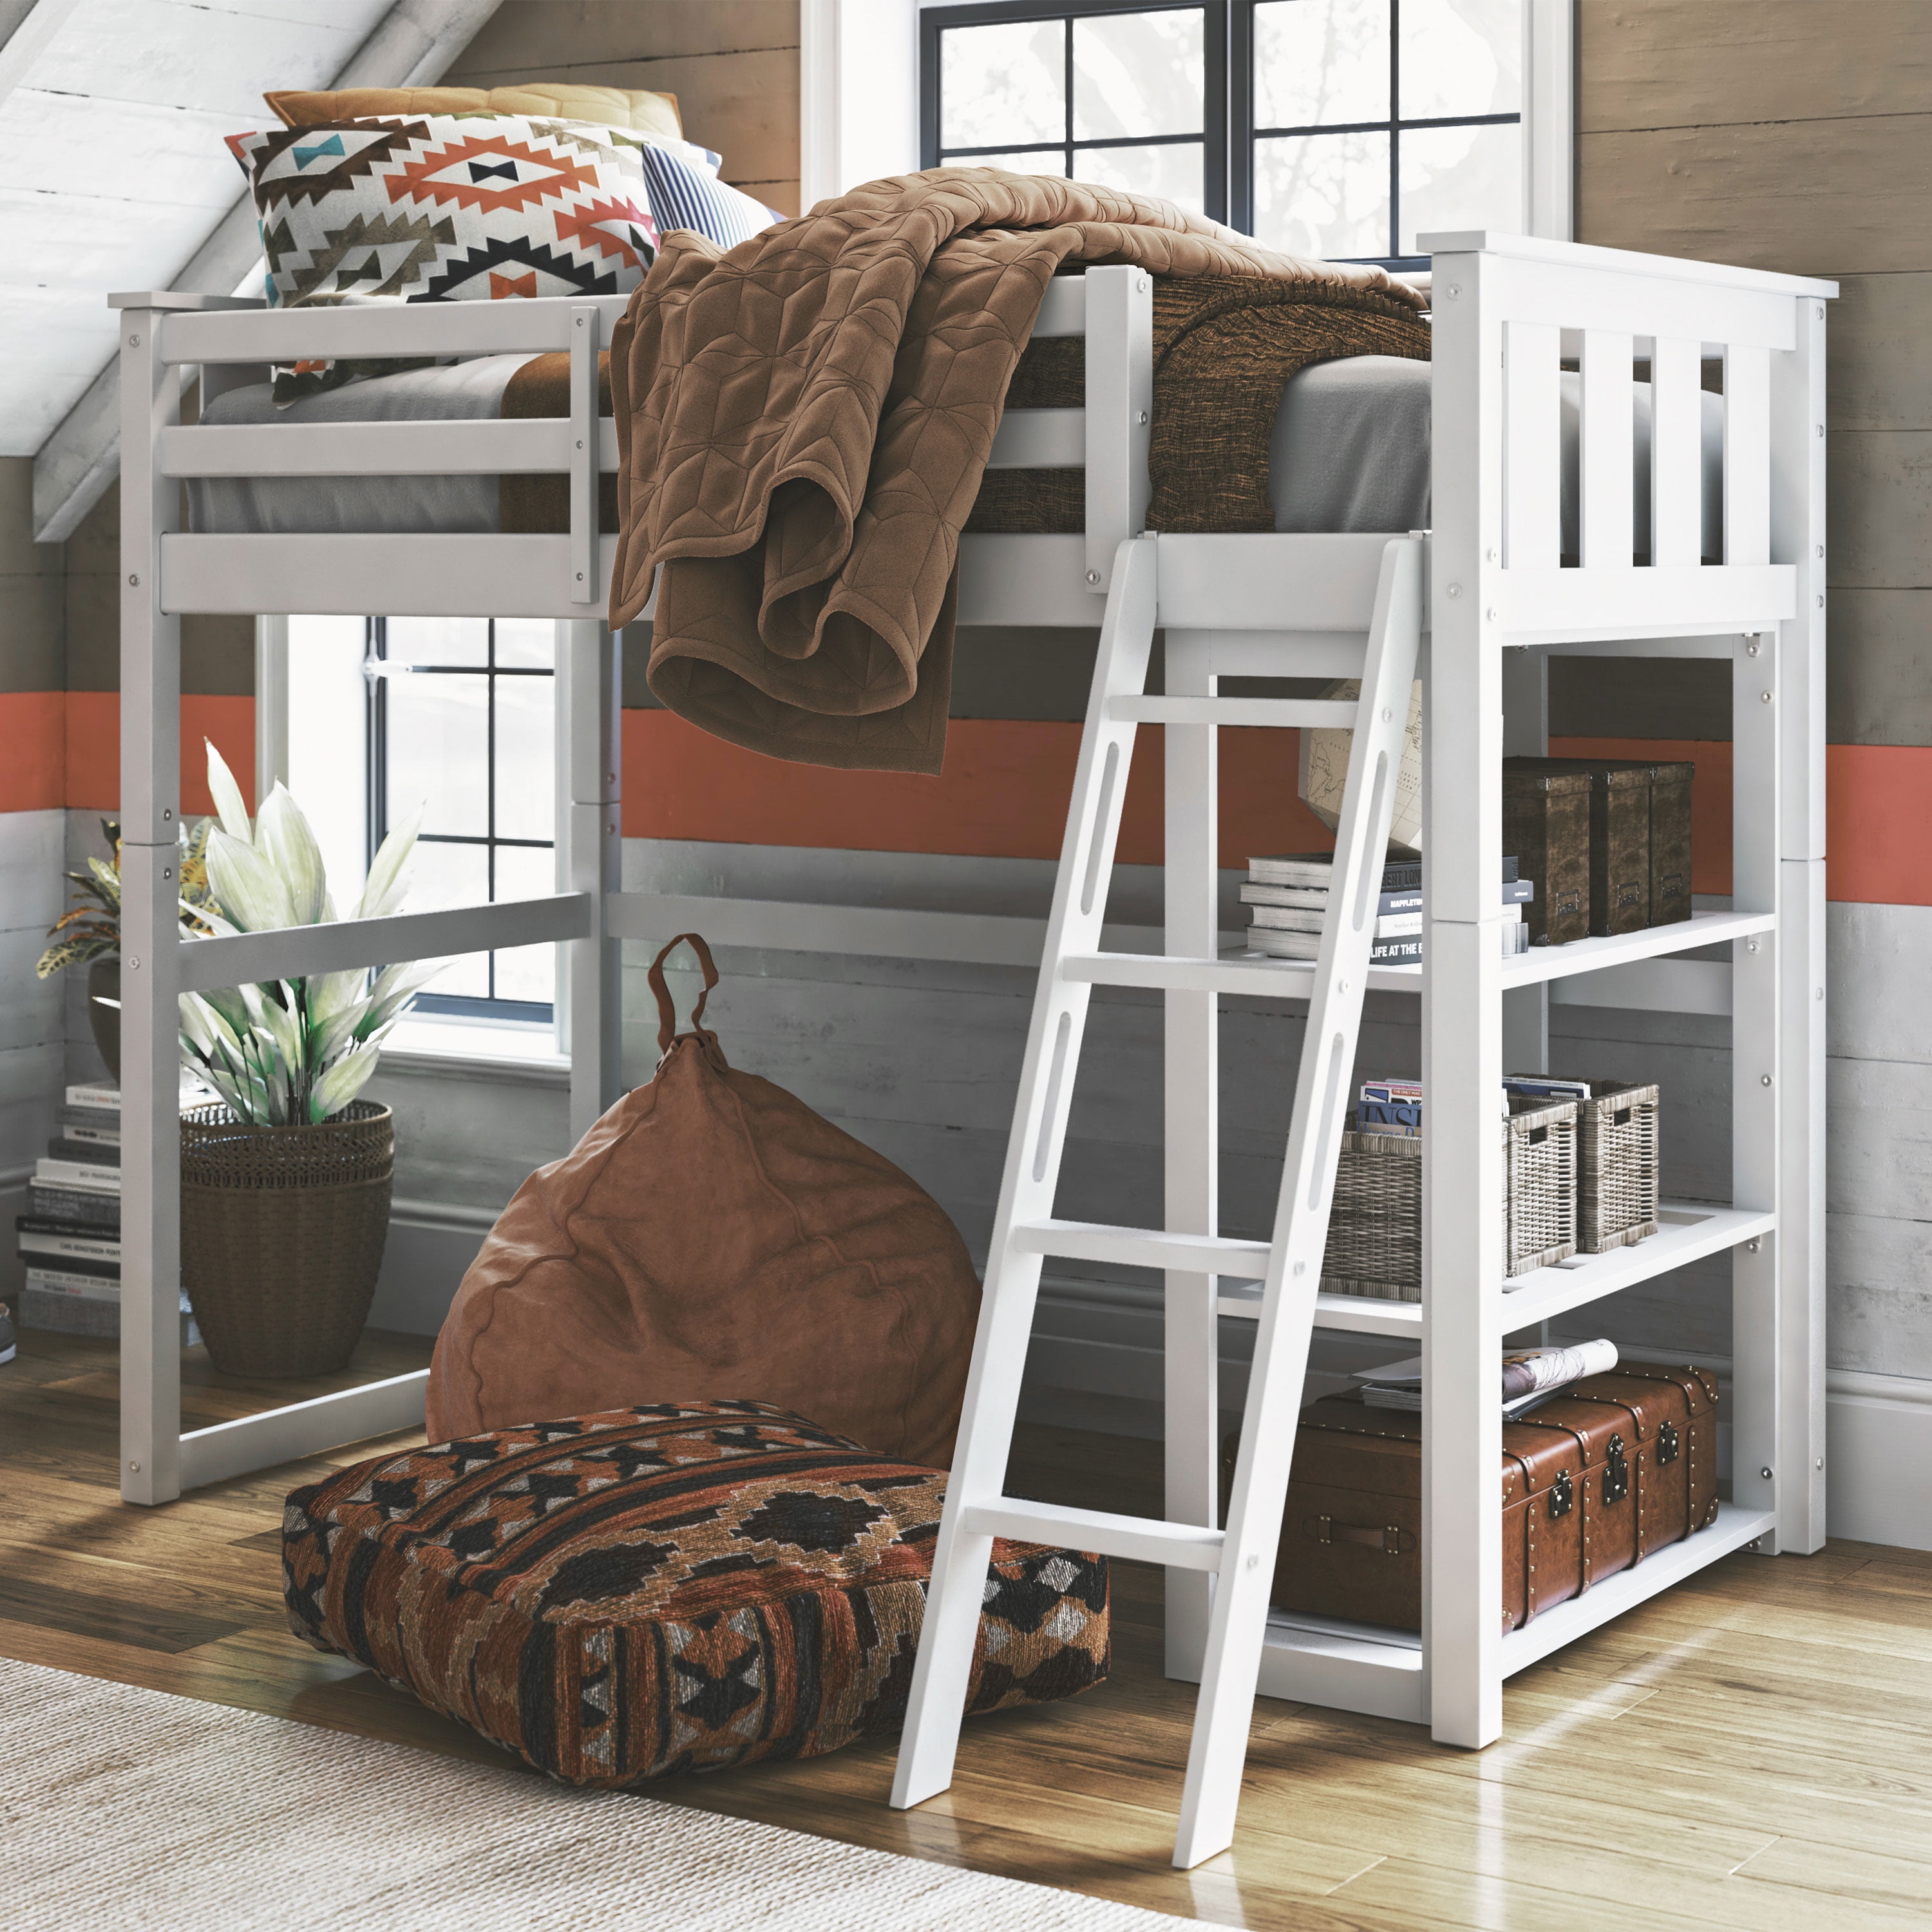 Better Homes Gardens Kane Twin Loft, Better Homes And Gardens Twin Bunk Bed